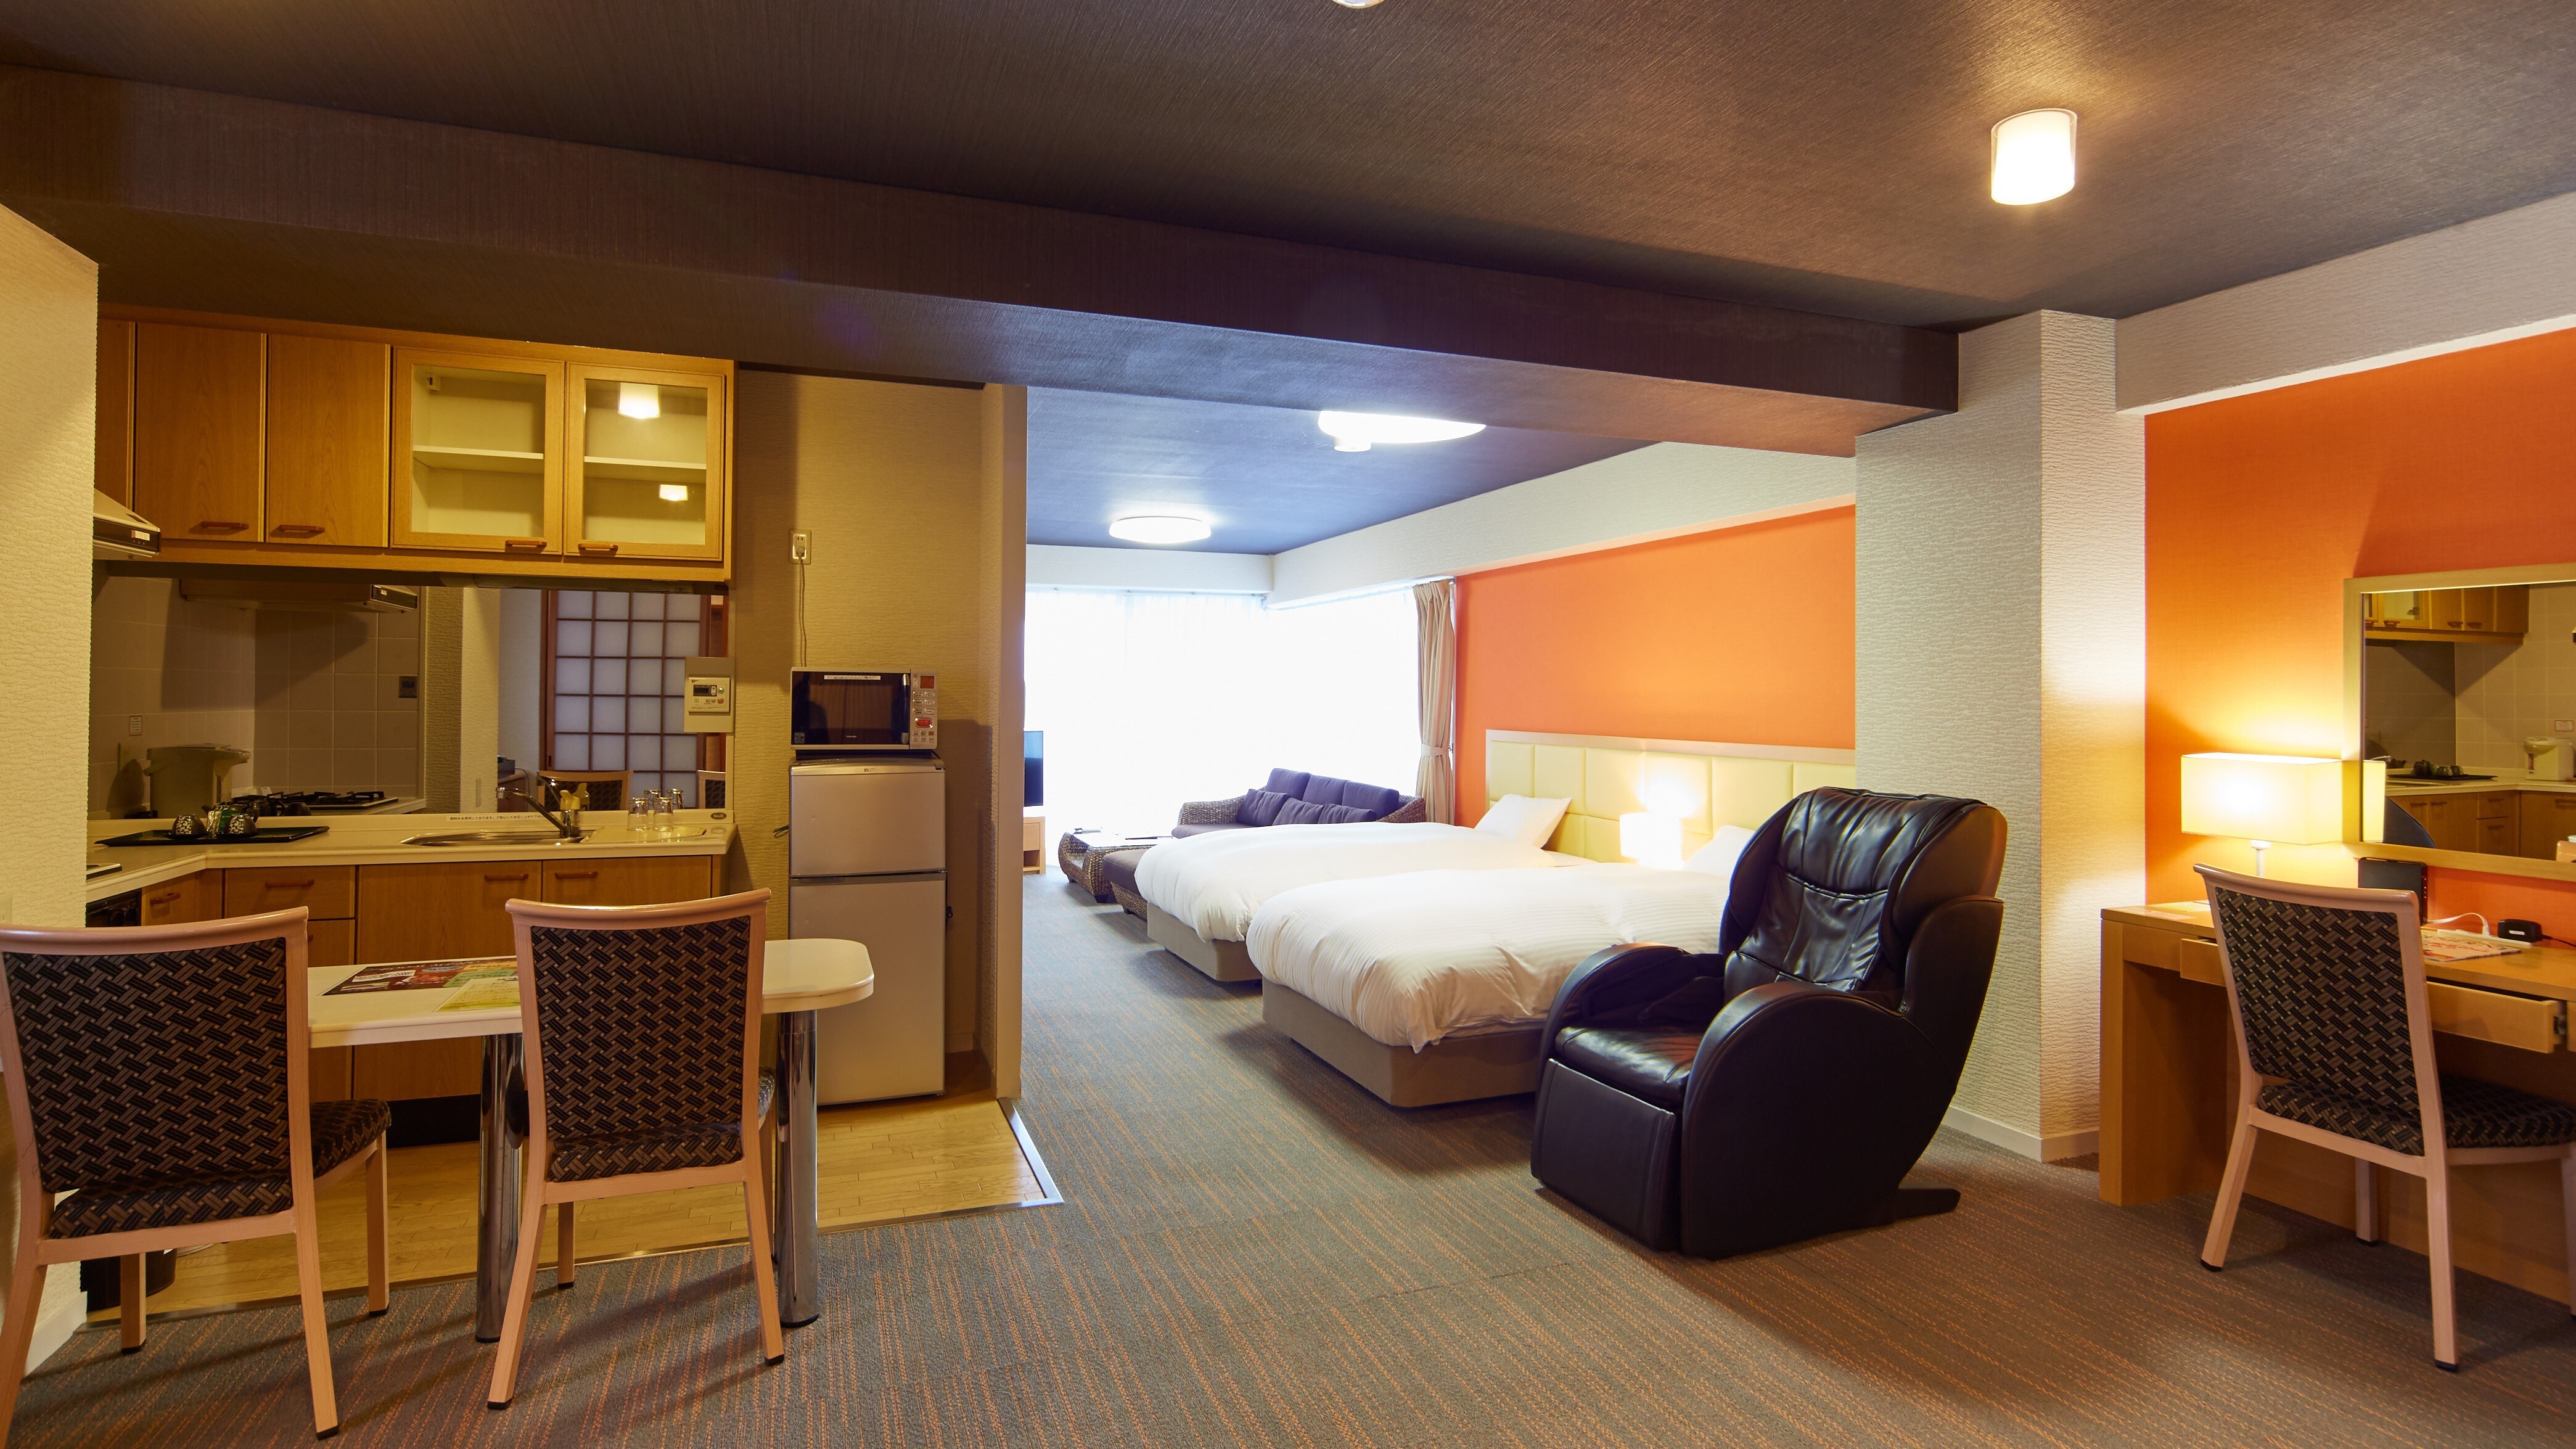 The 85 m² room can accommodate up to 8 people. There are various types of floor plans.